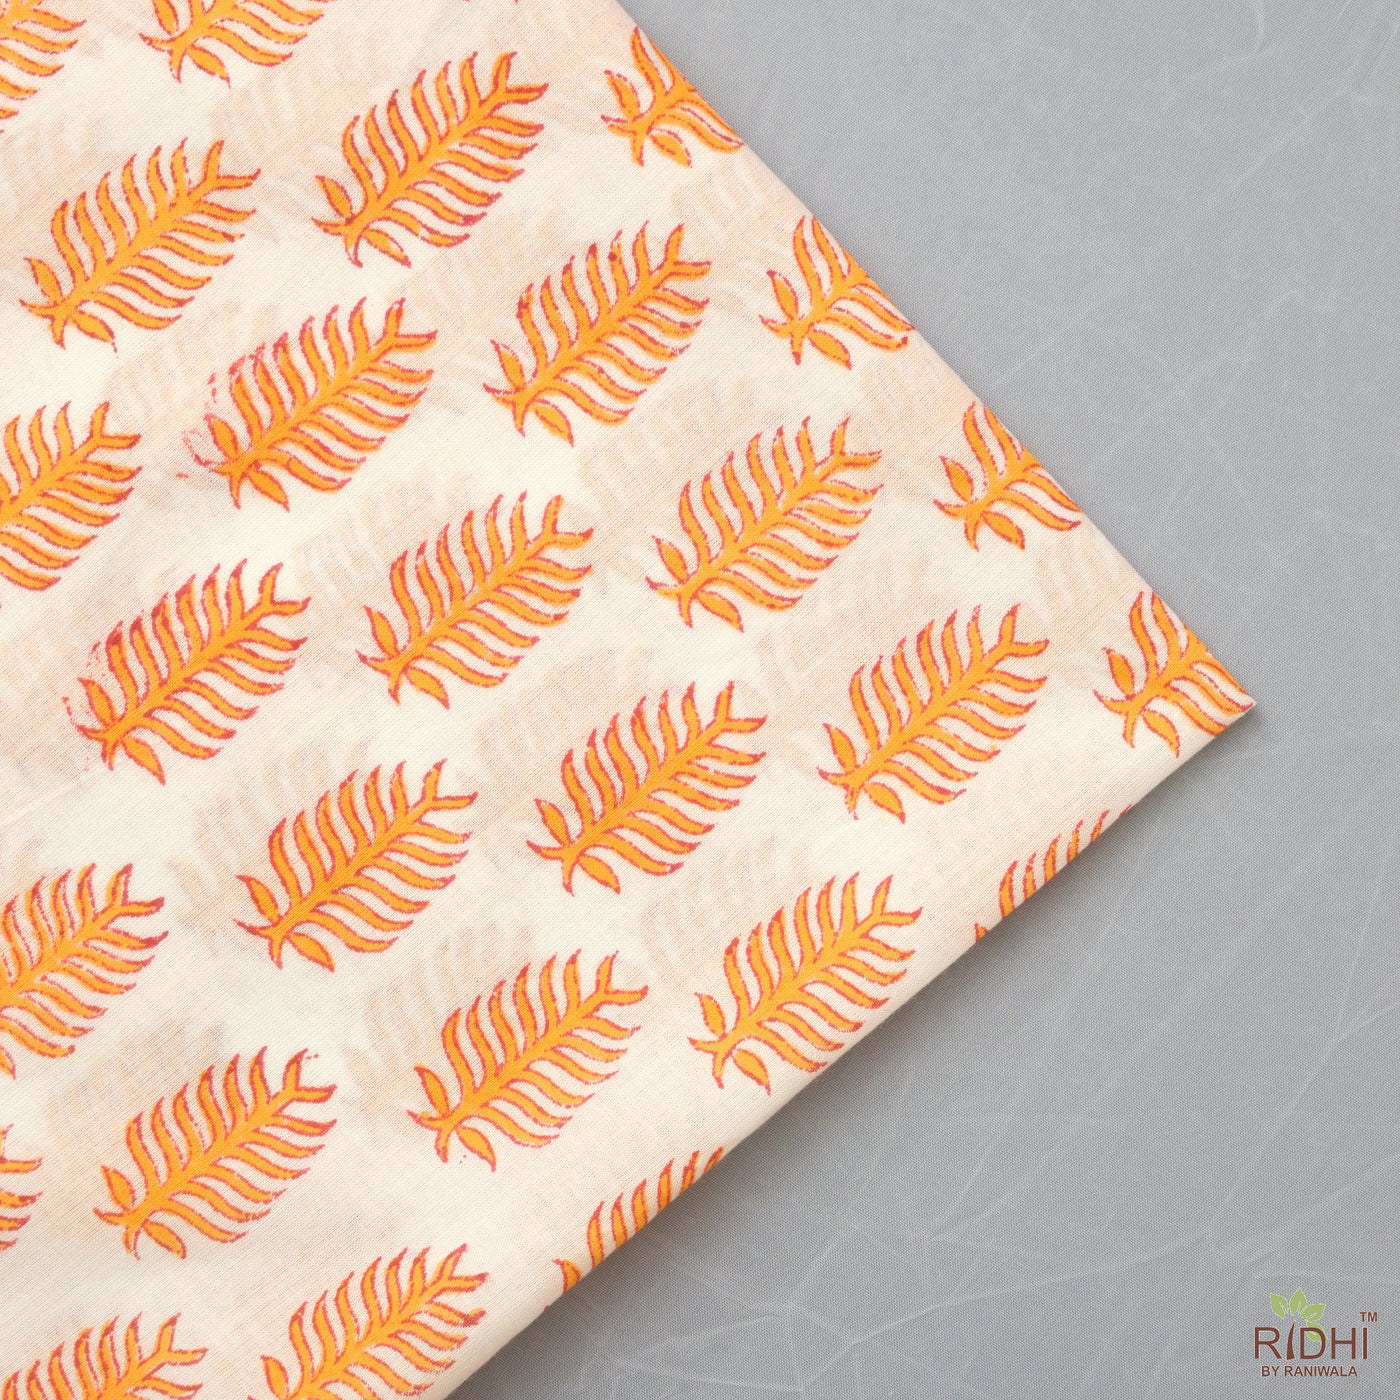 Gold Yellow Indian Hand Block Leaf Printed 100 % Biodegradable Pure Cotton Cloth Napkins, 18x18"- Cocktail Napkins, 20x20"- Dinner Napkins